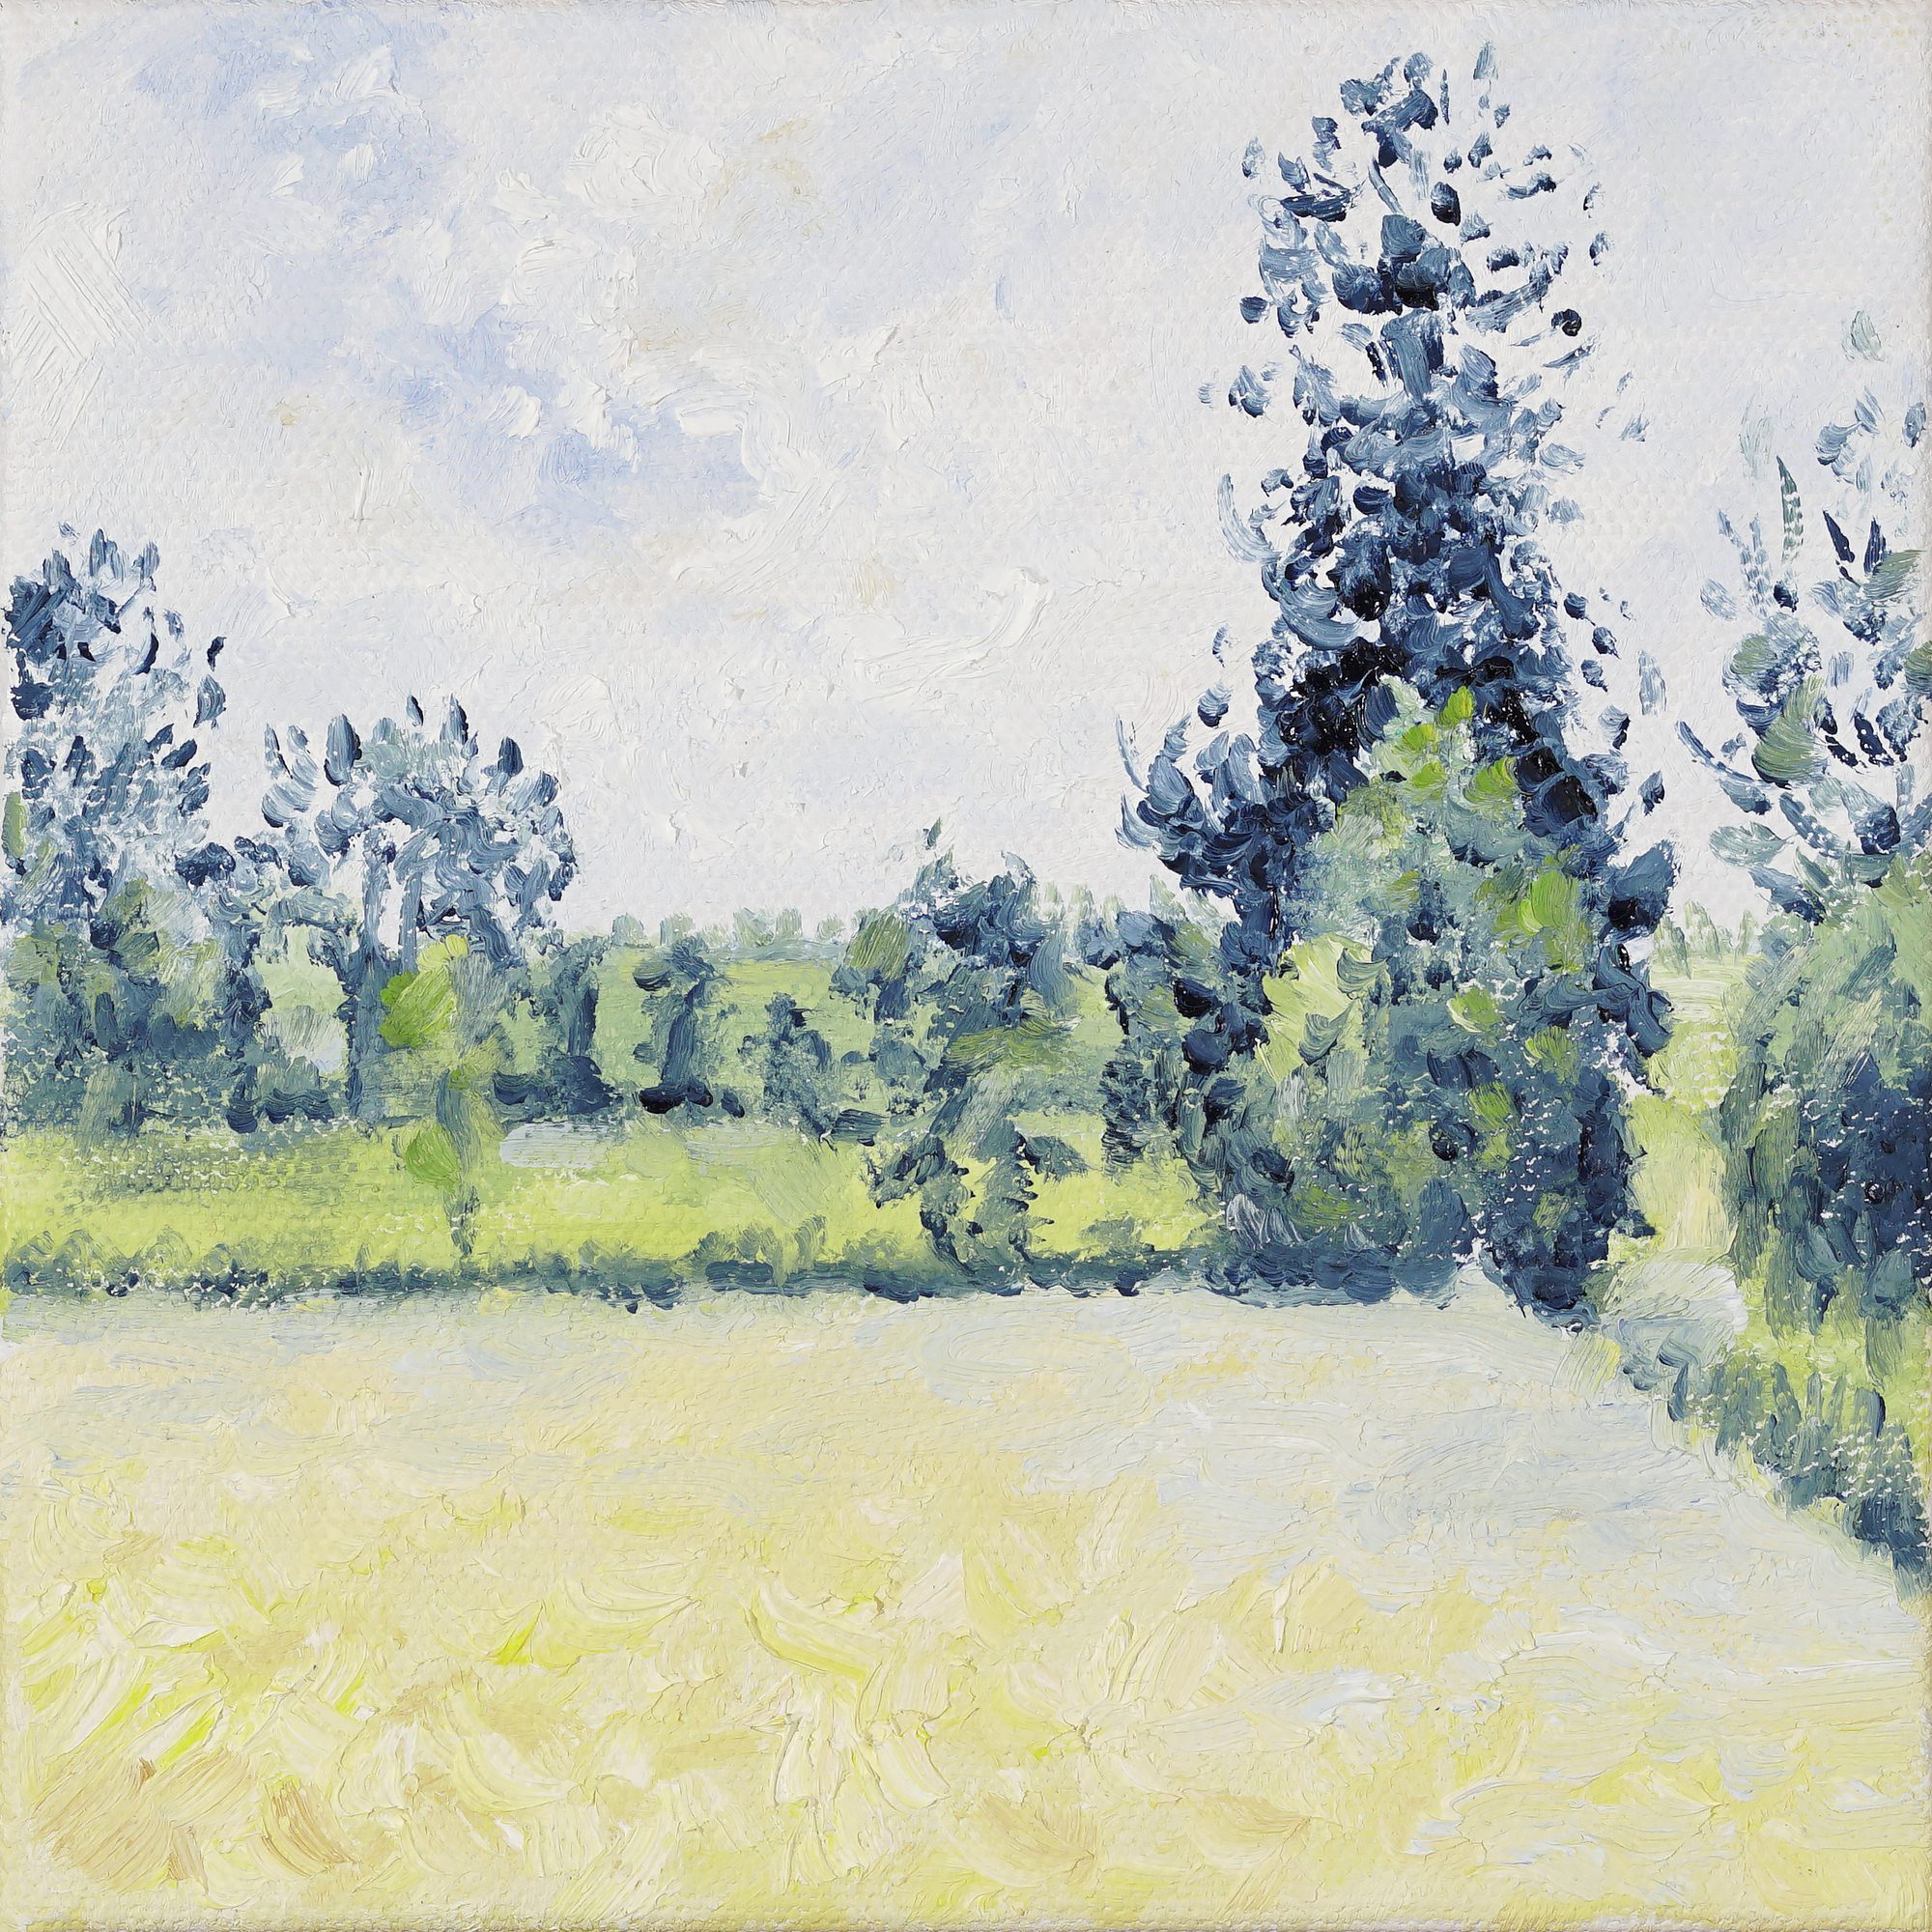 Cindy Sugg, Field of Oats in Eragny, after Pissarro